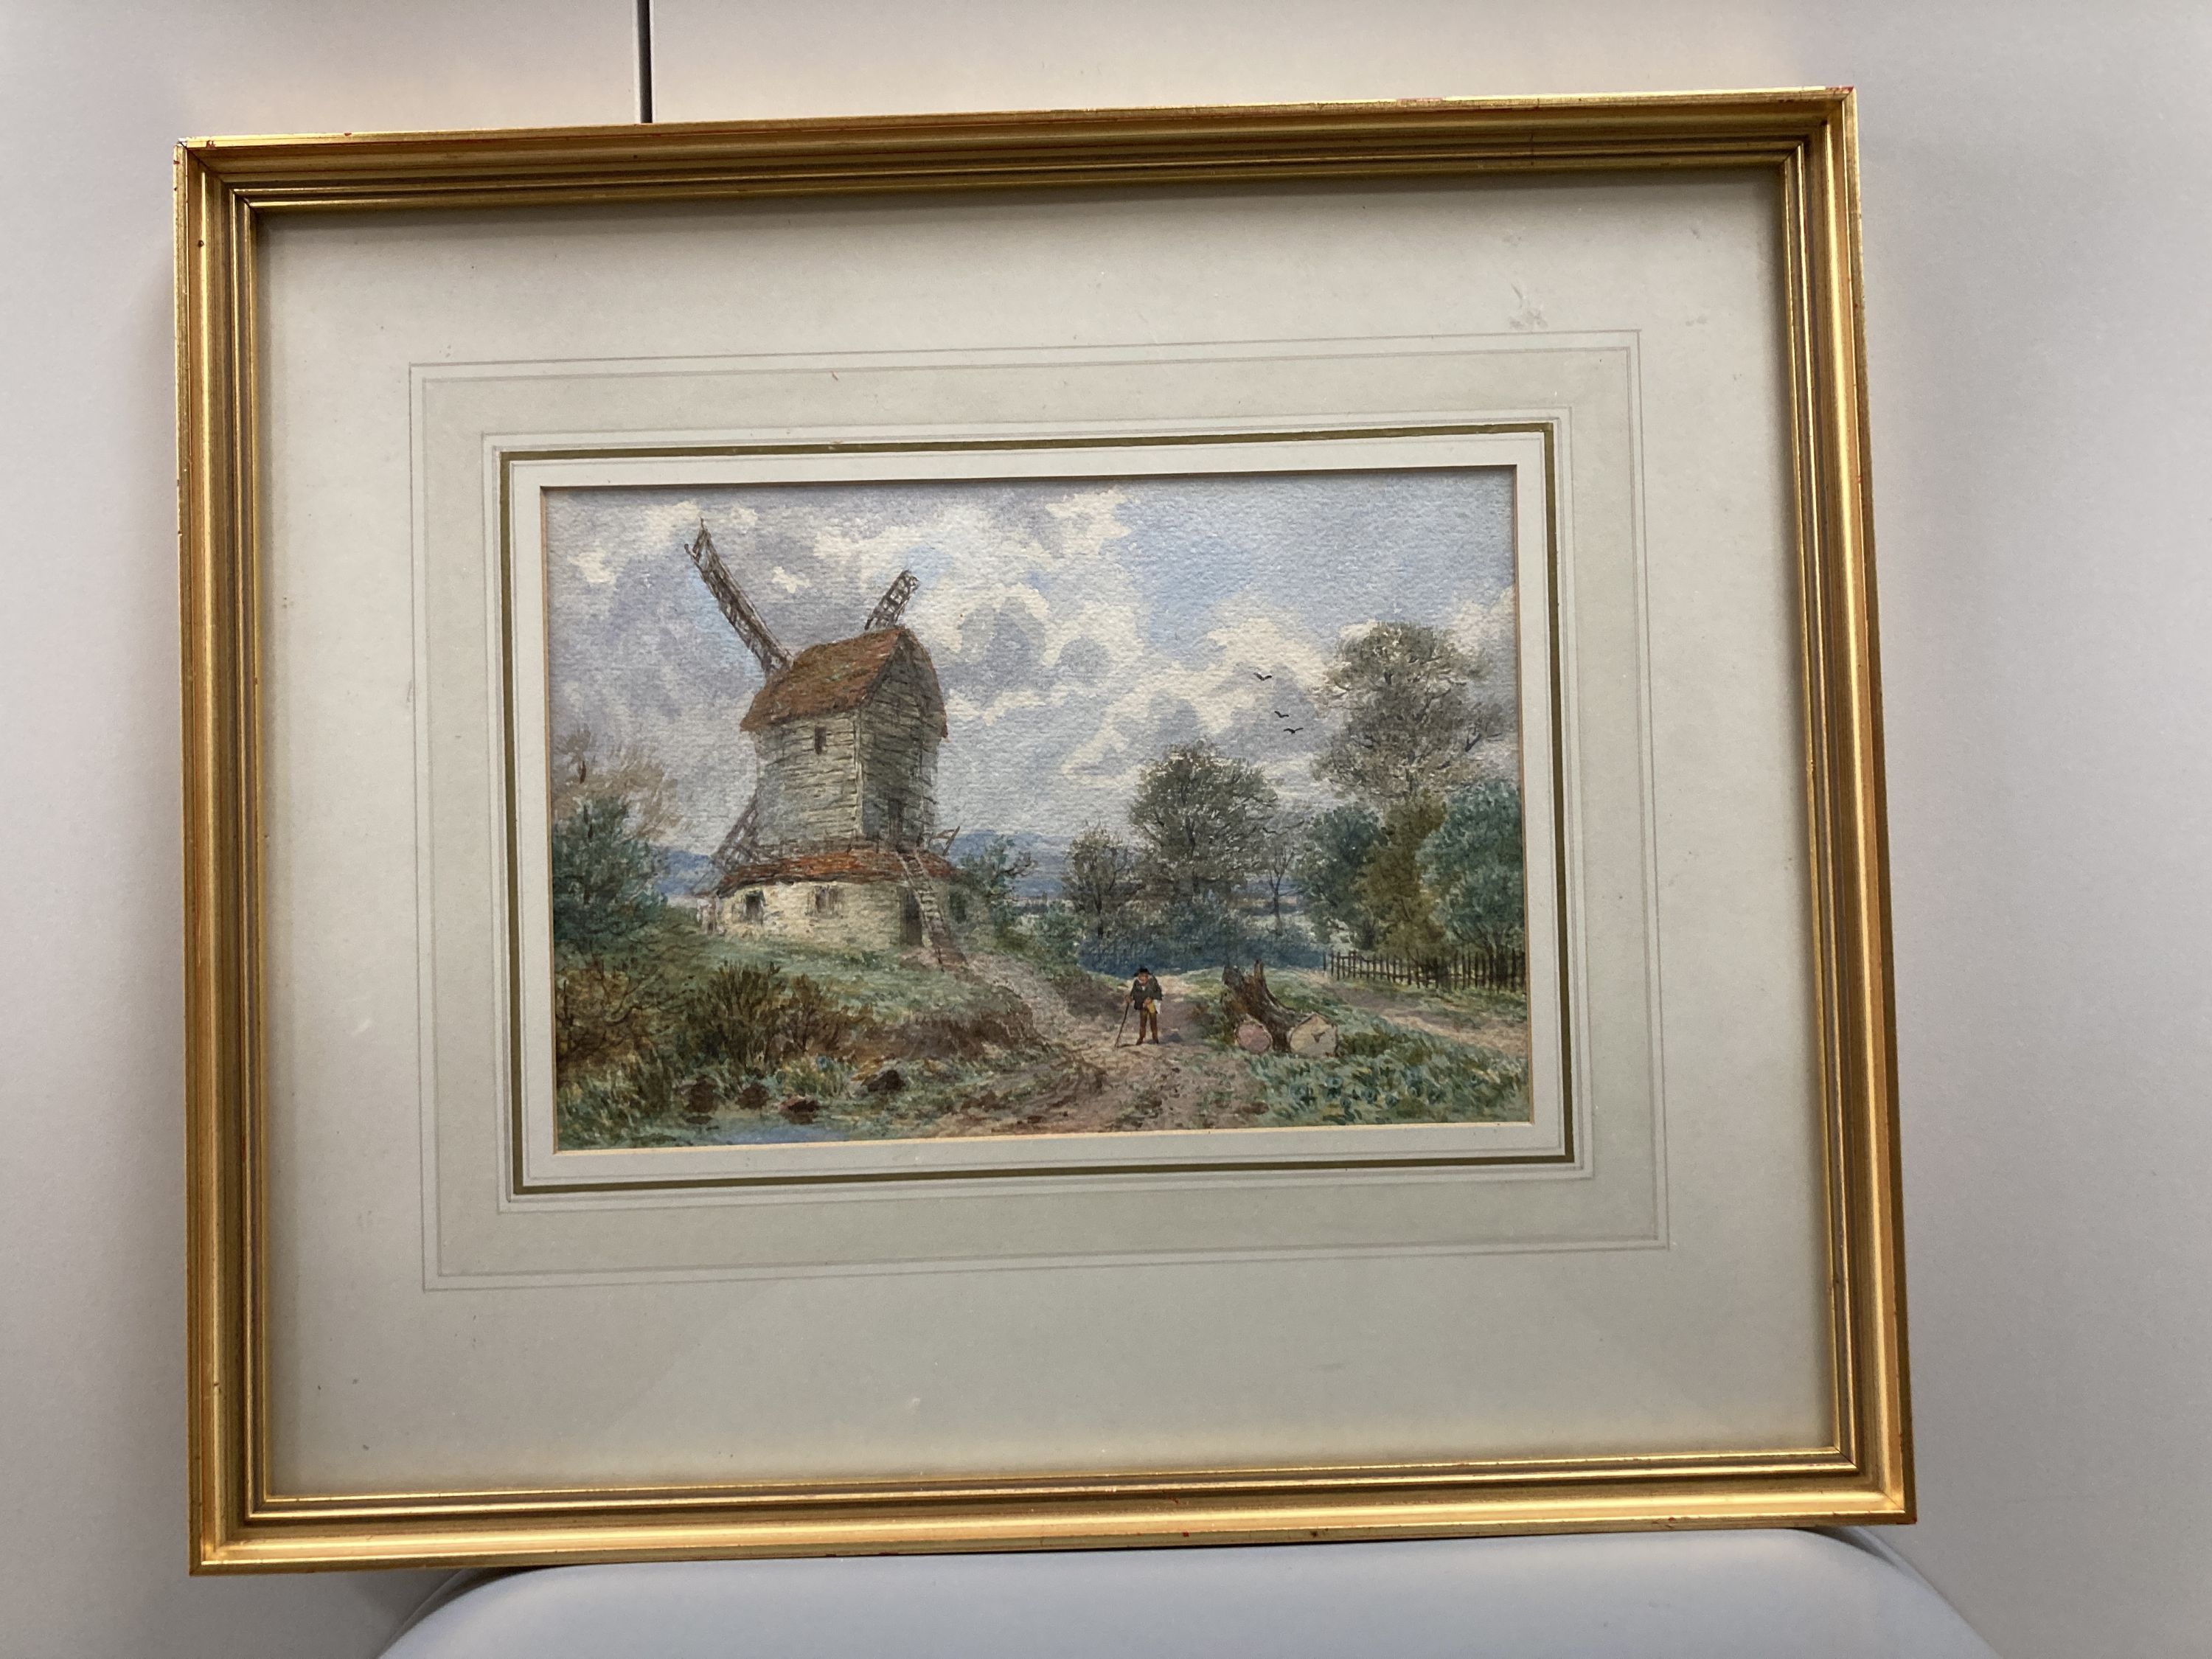 Late 19th century English School, watercolour, Traveller passing a windmill, 16.5 x 24cm